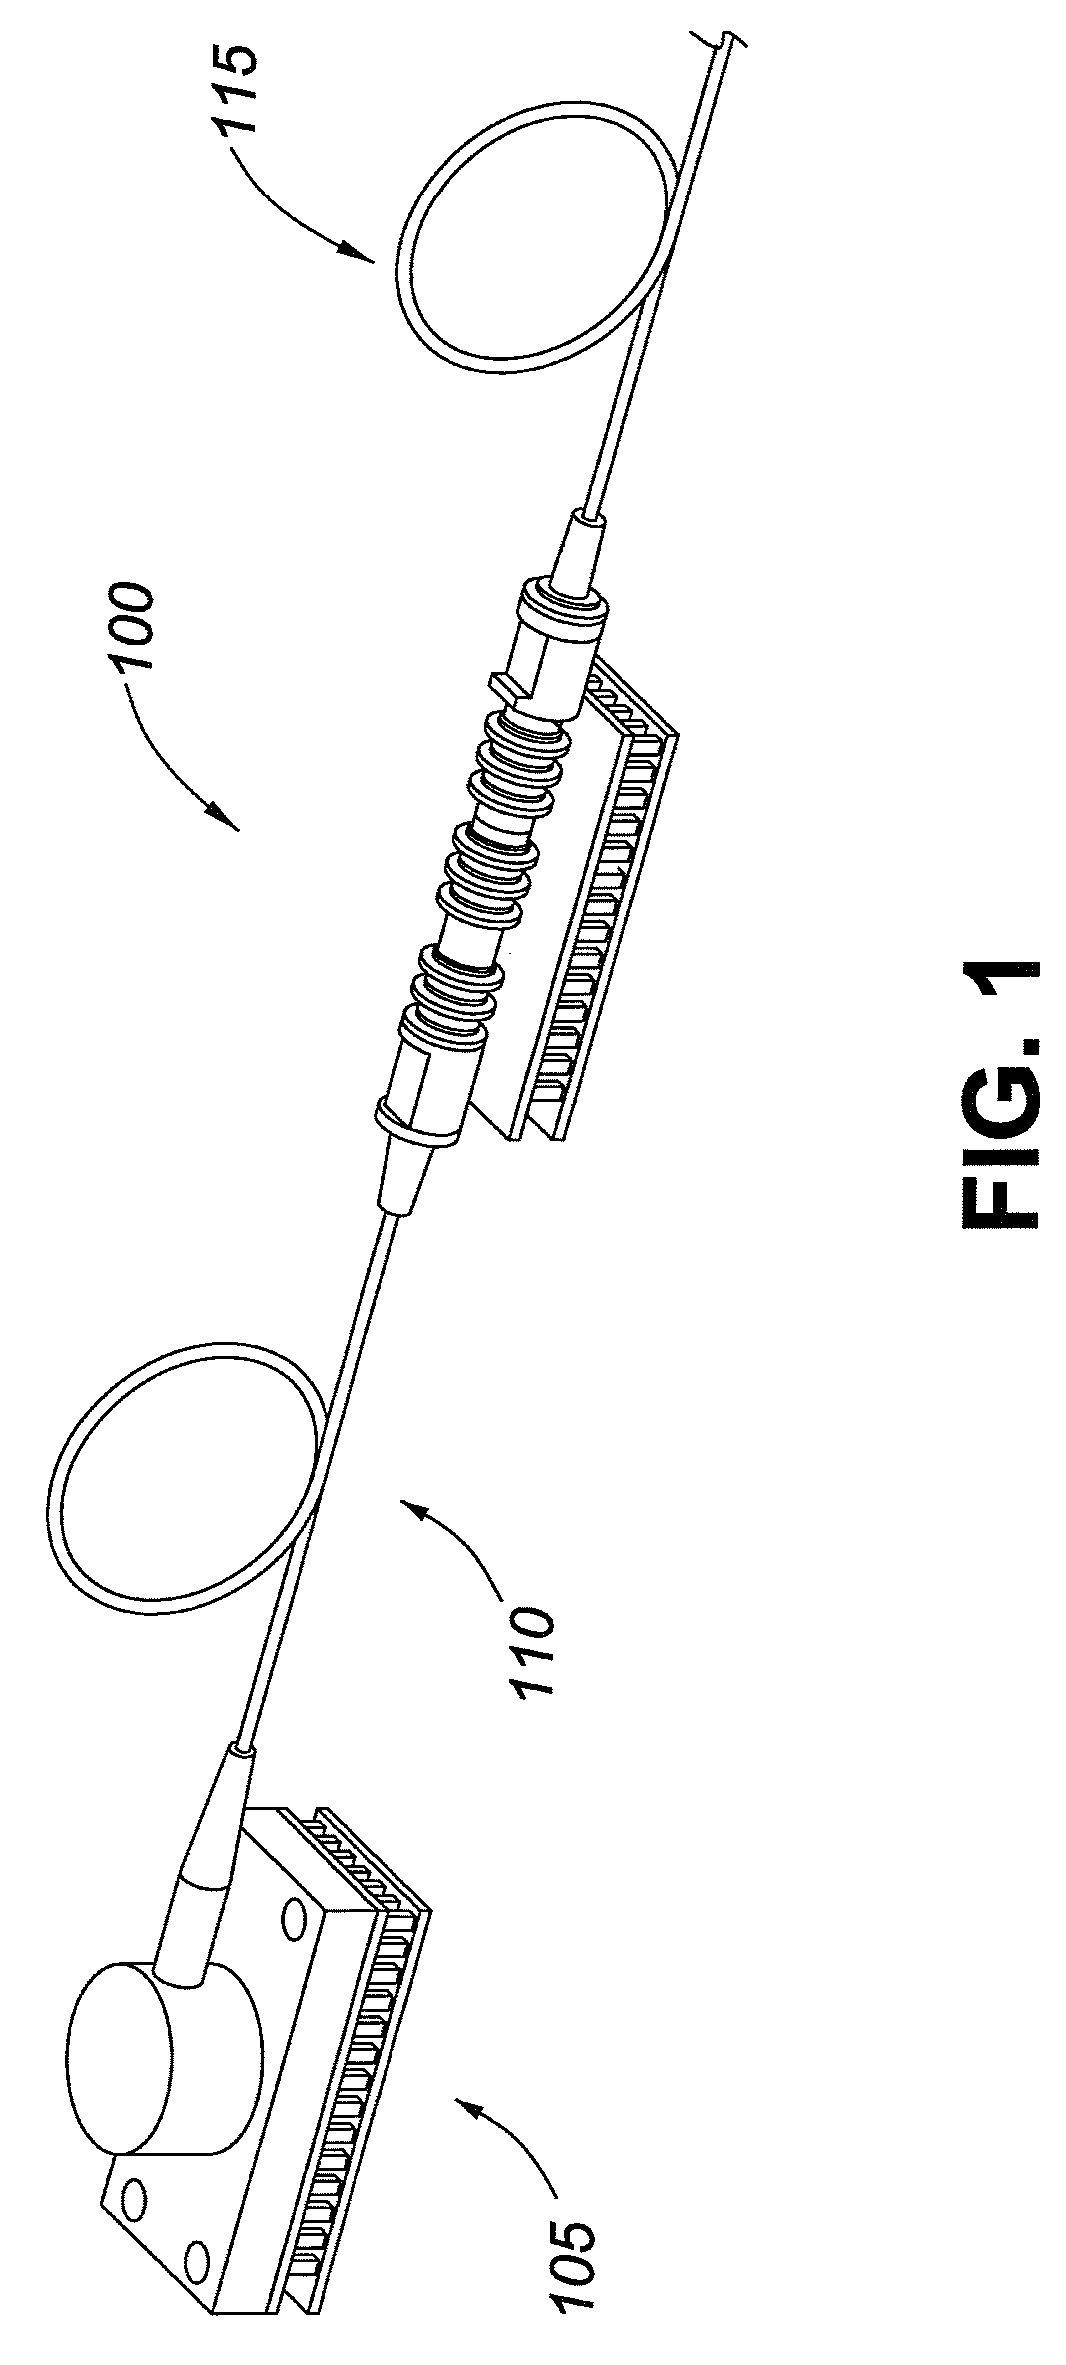 Modular solid-state laser platform based on coaxial package and corresponding assembly process